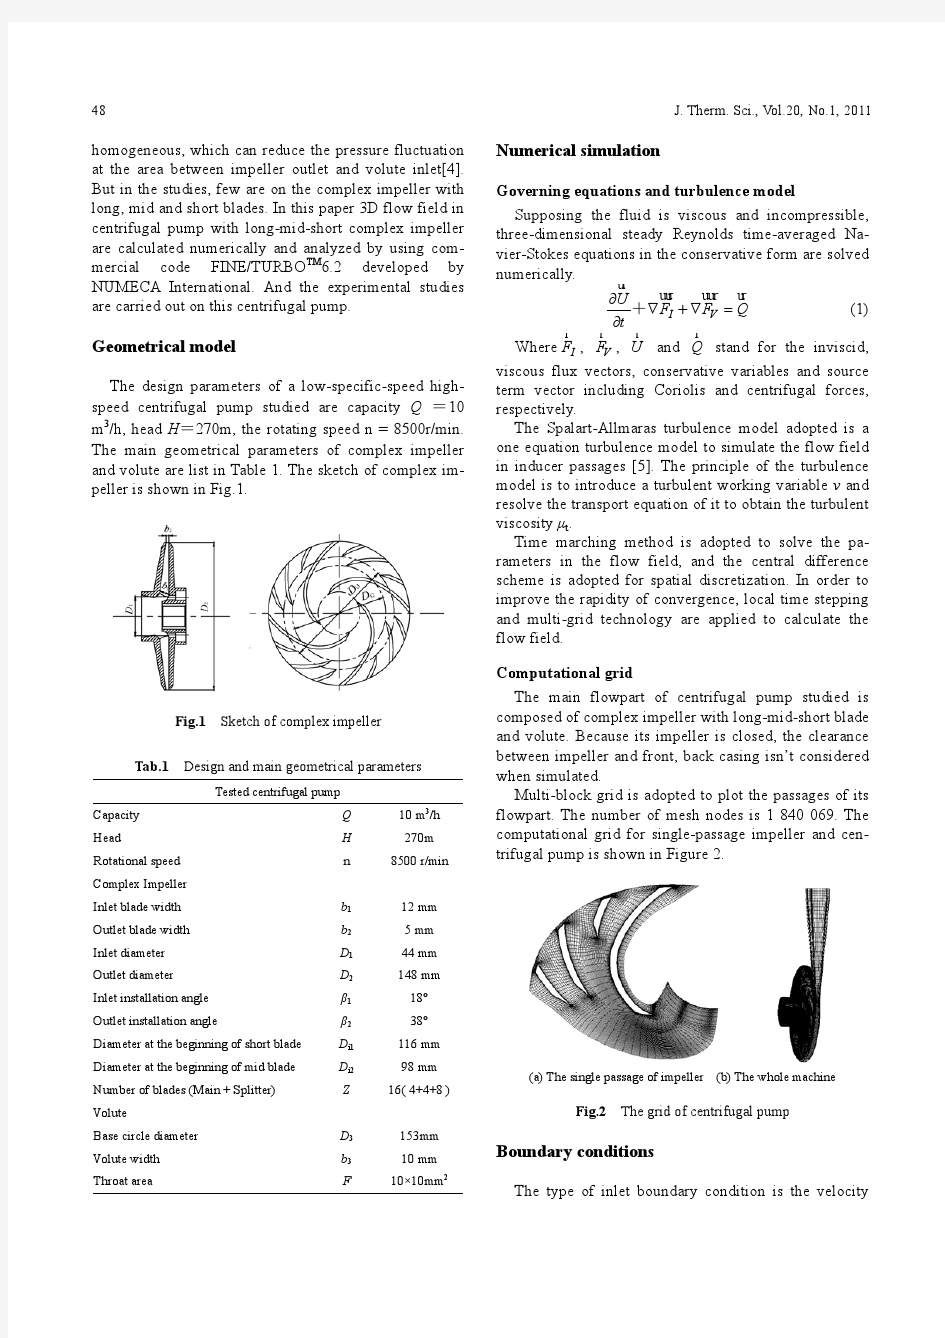 Numerical simulation of flow in centrifugal pump with complex impeller